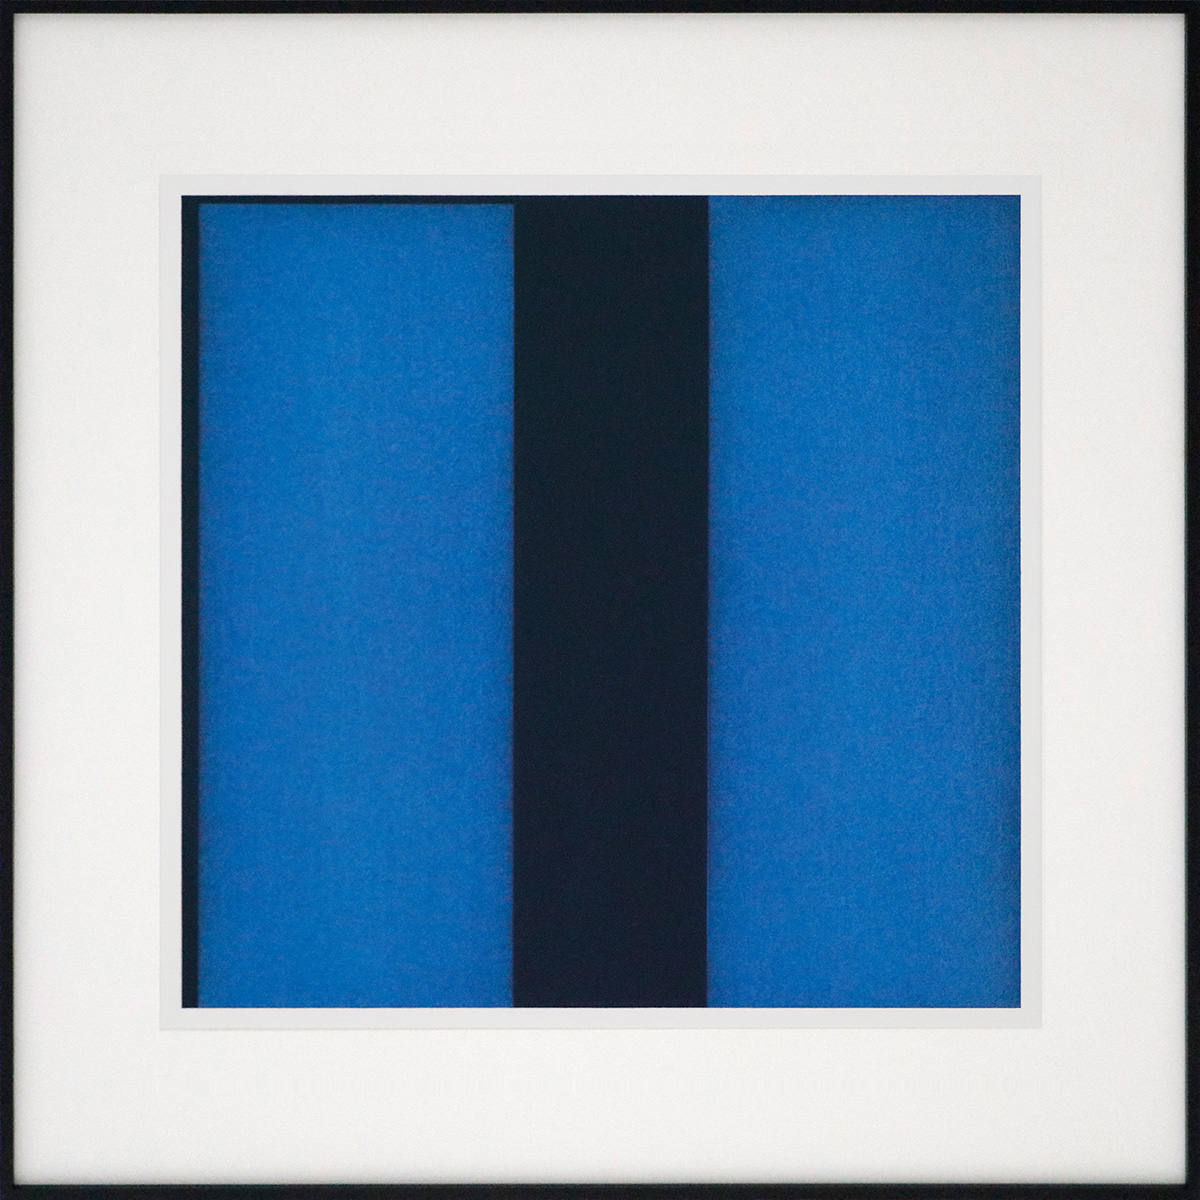 Unbound Blue, 200150 x 50 cm in 70 x 70 cmAcrylic and charcoal on paper; framed, museum glass